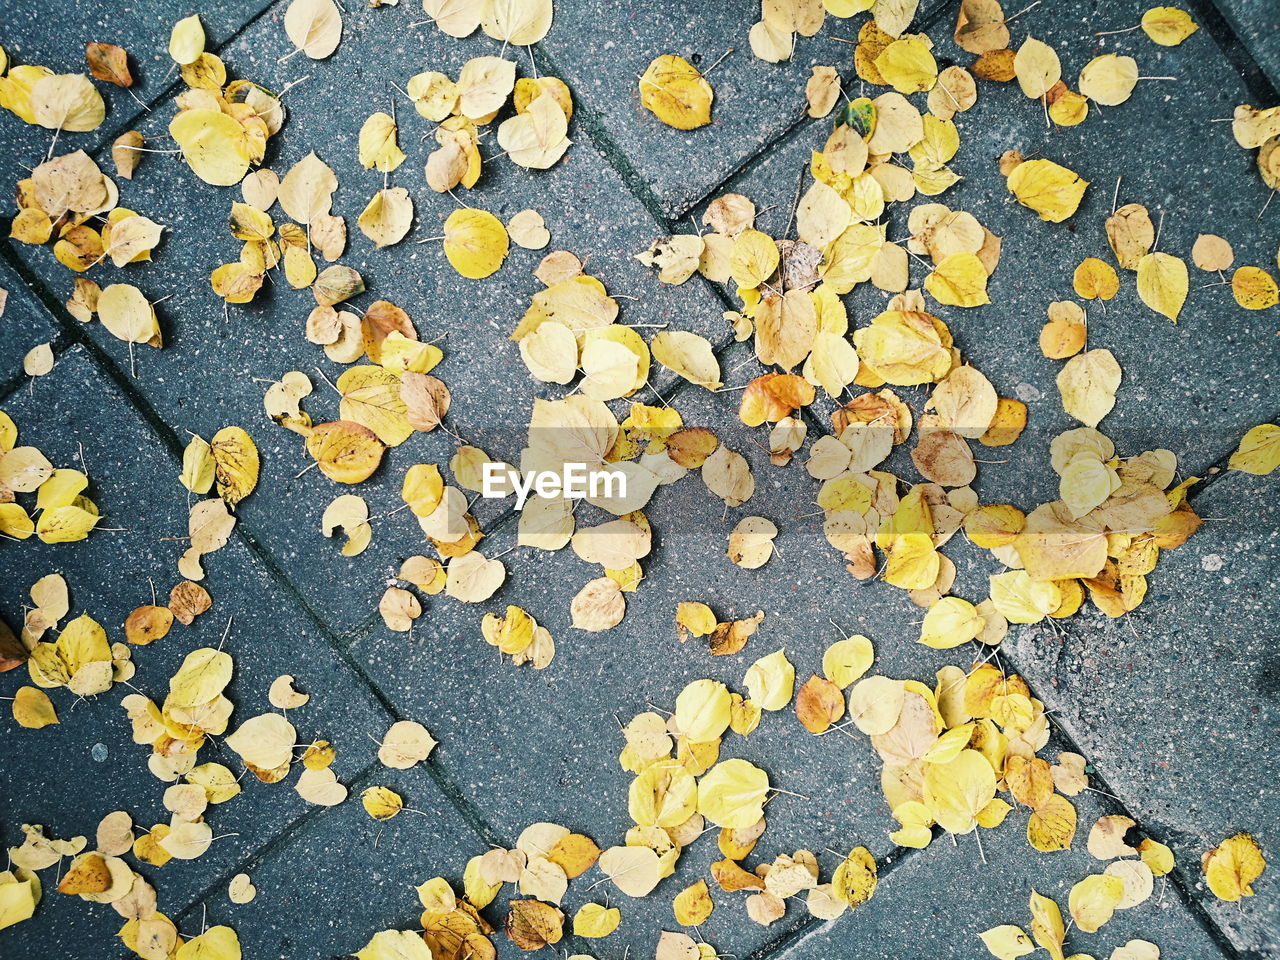 CLOSE-UP OF YELLOW AUTUMN LEAF ON CONCRETE SURFACE